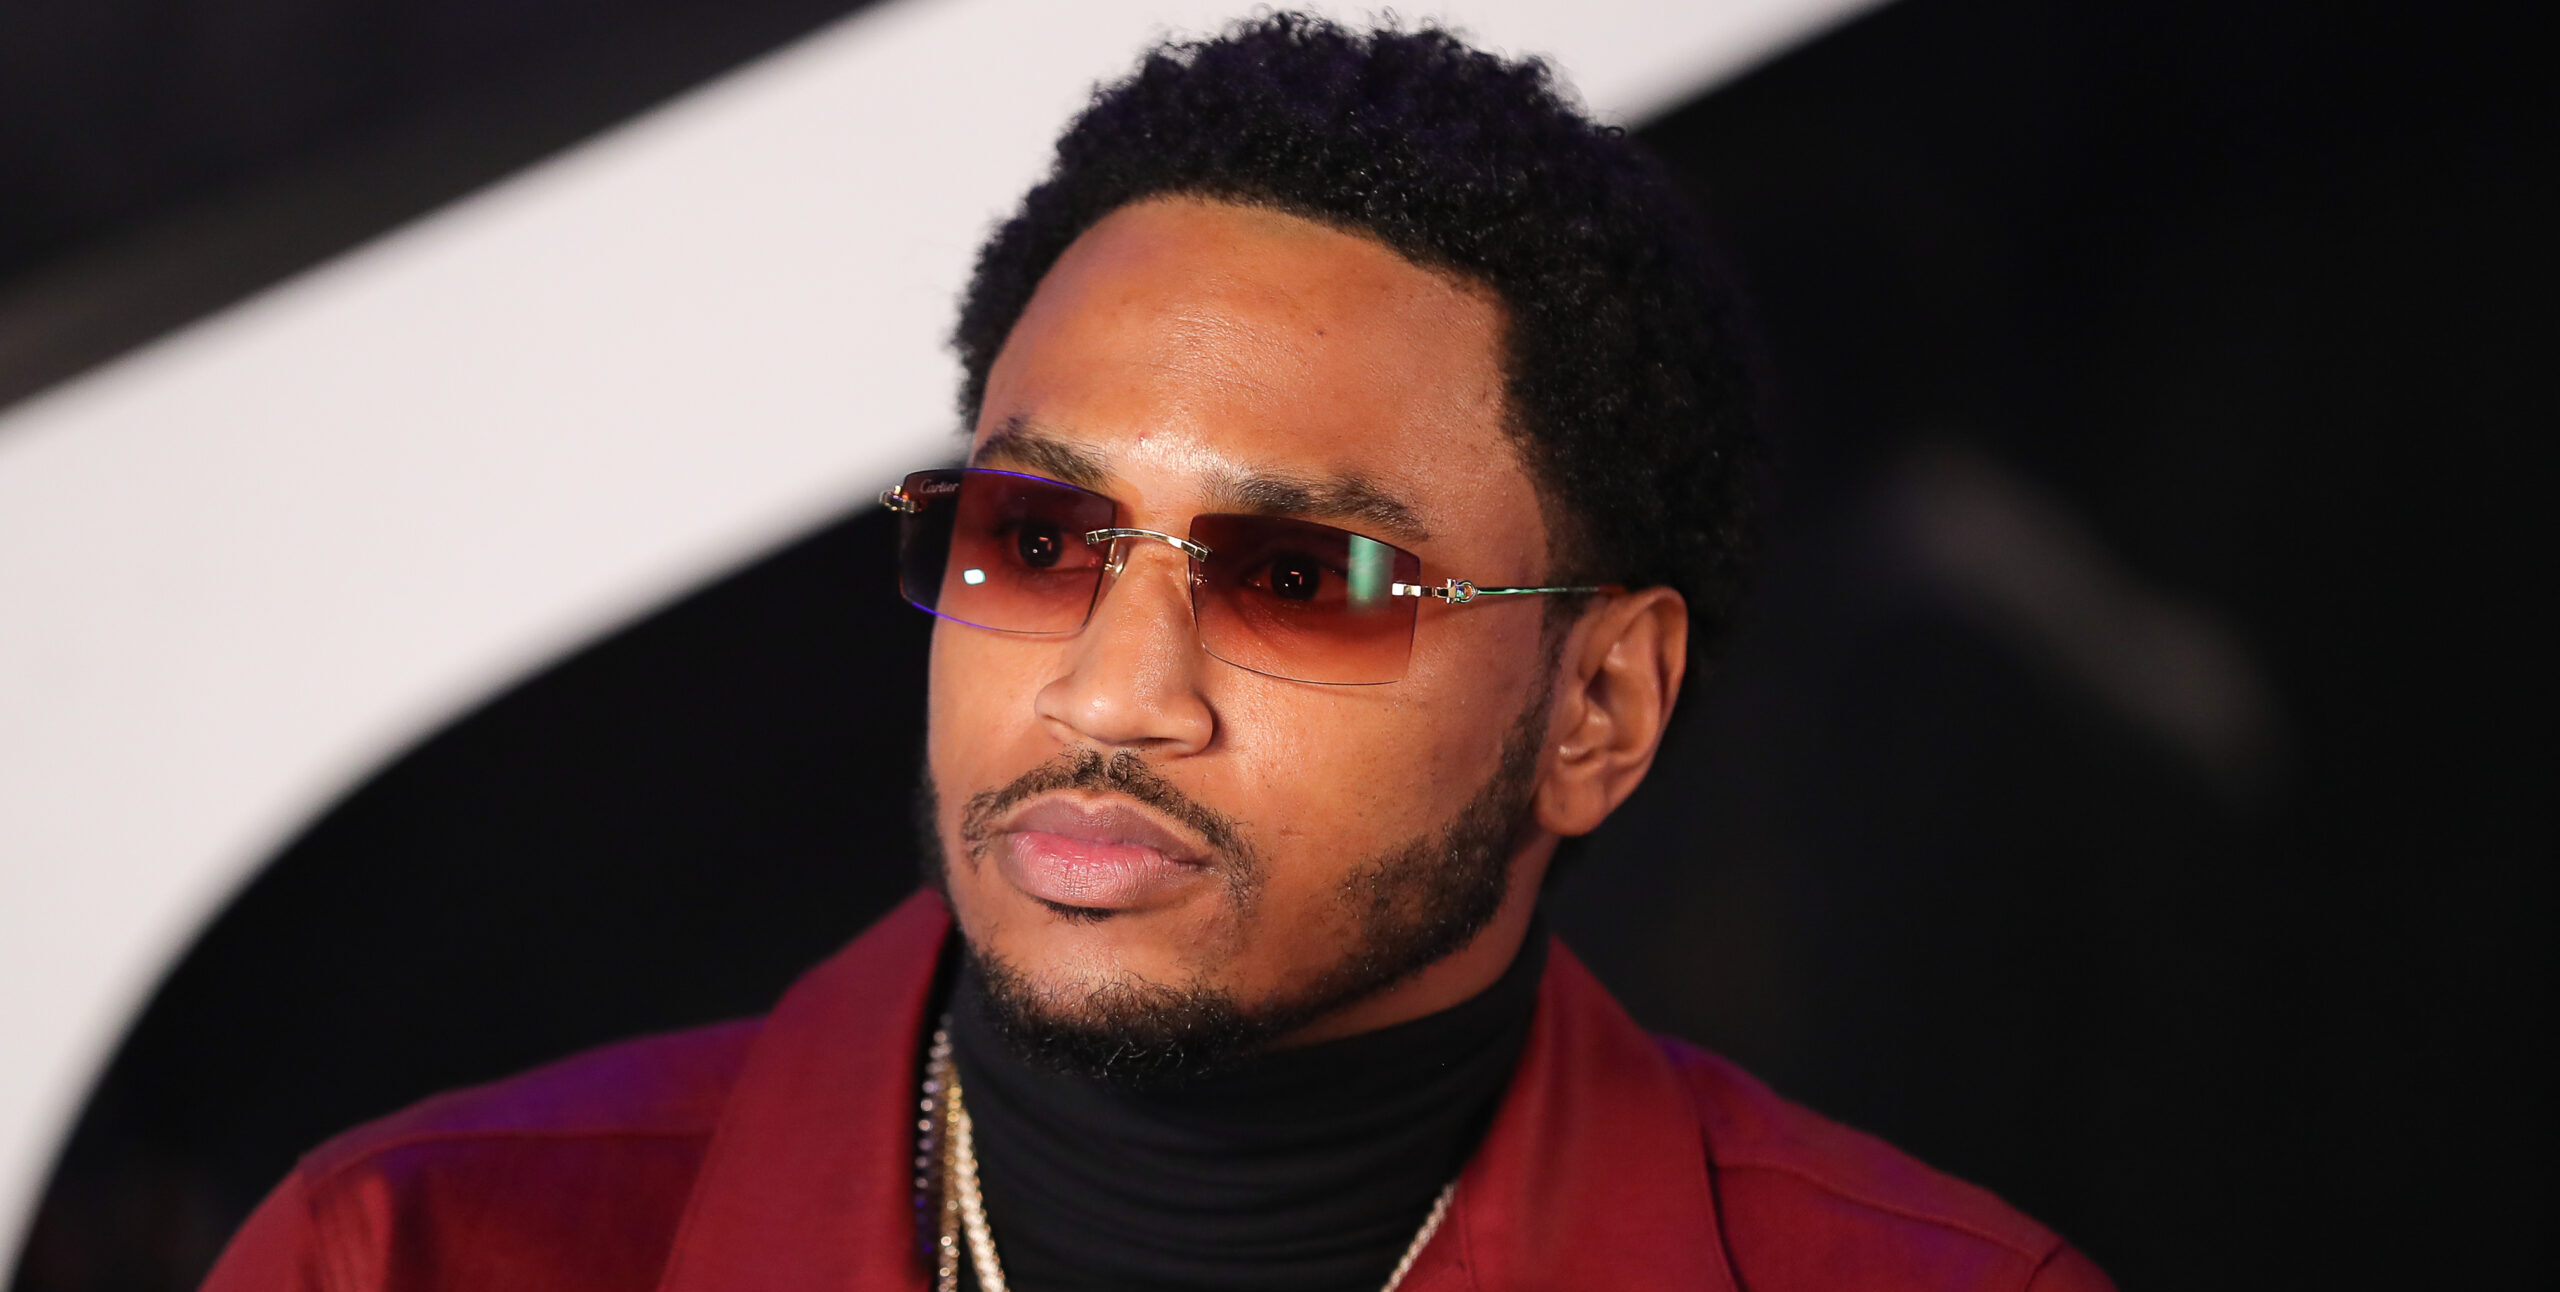 We Can’t Ignore The Sexual Assault Allegations Against Trey Songz